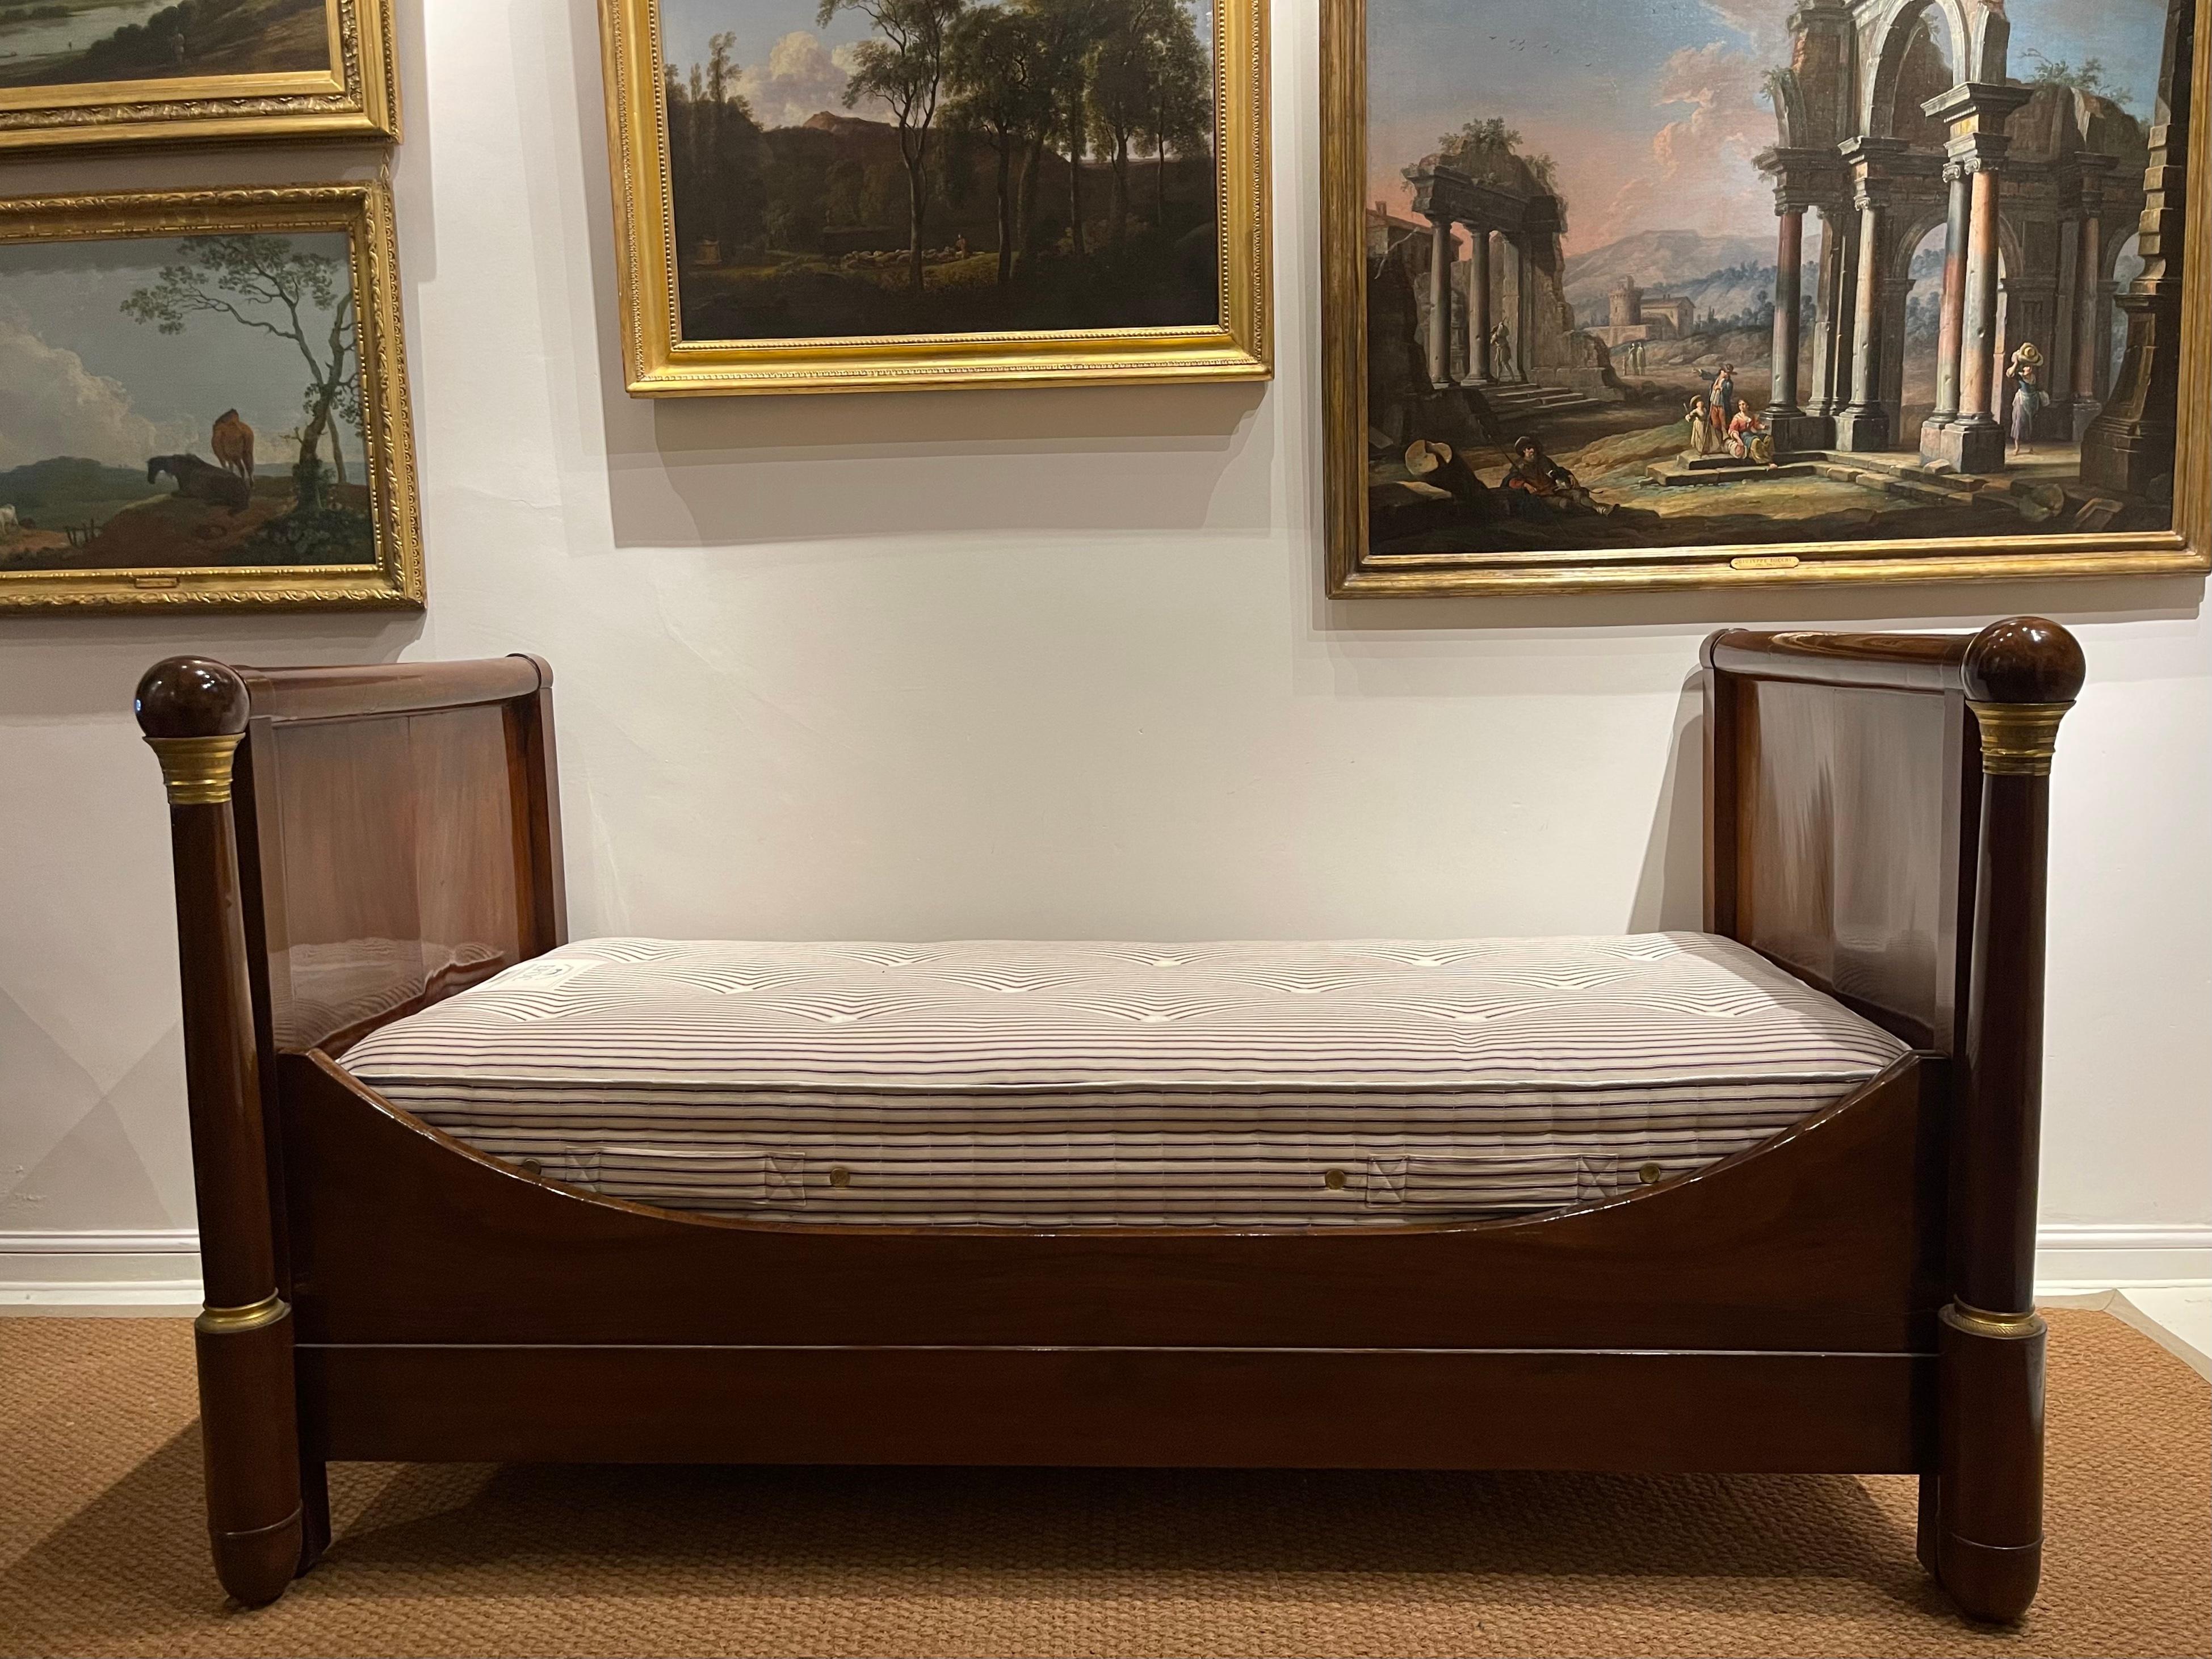 A Restauration Napoleonic Empire Ormolu-Mounted mahogany day bed (Early 19th Century).

The structure consists of solid mahogany. The outward facing ends are each joined to a column, each surmounted by a solid mahogany ball. Ormolu embellishes